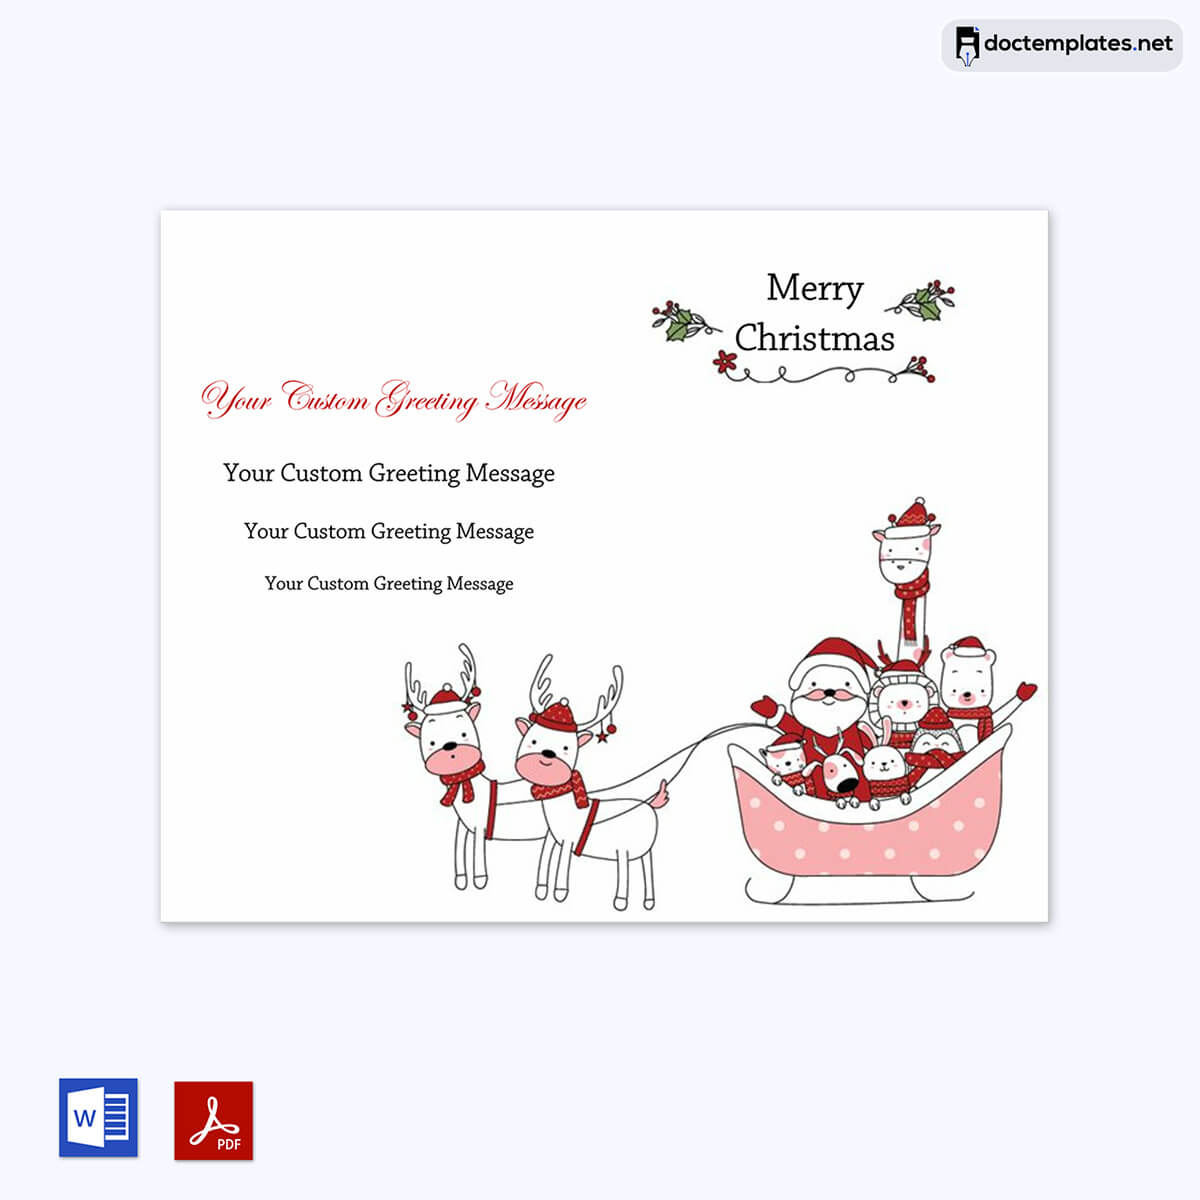 Image of Sample gift certificates to print Sample gift certificates to print 04